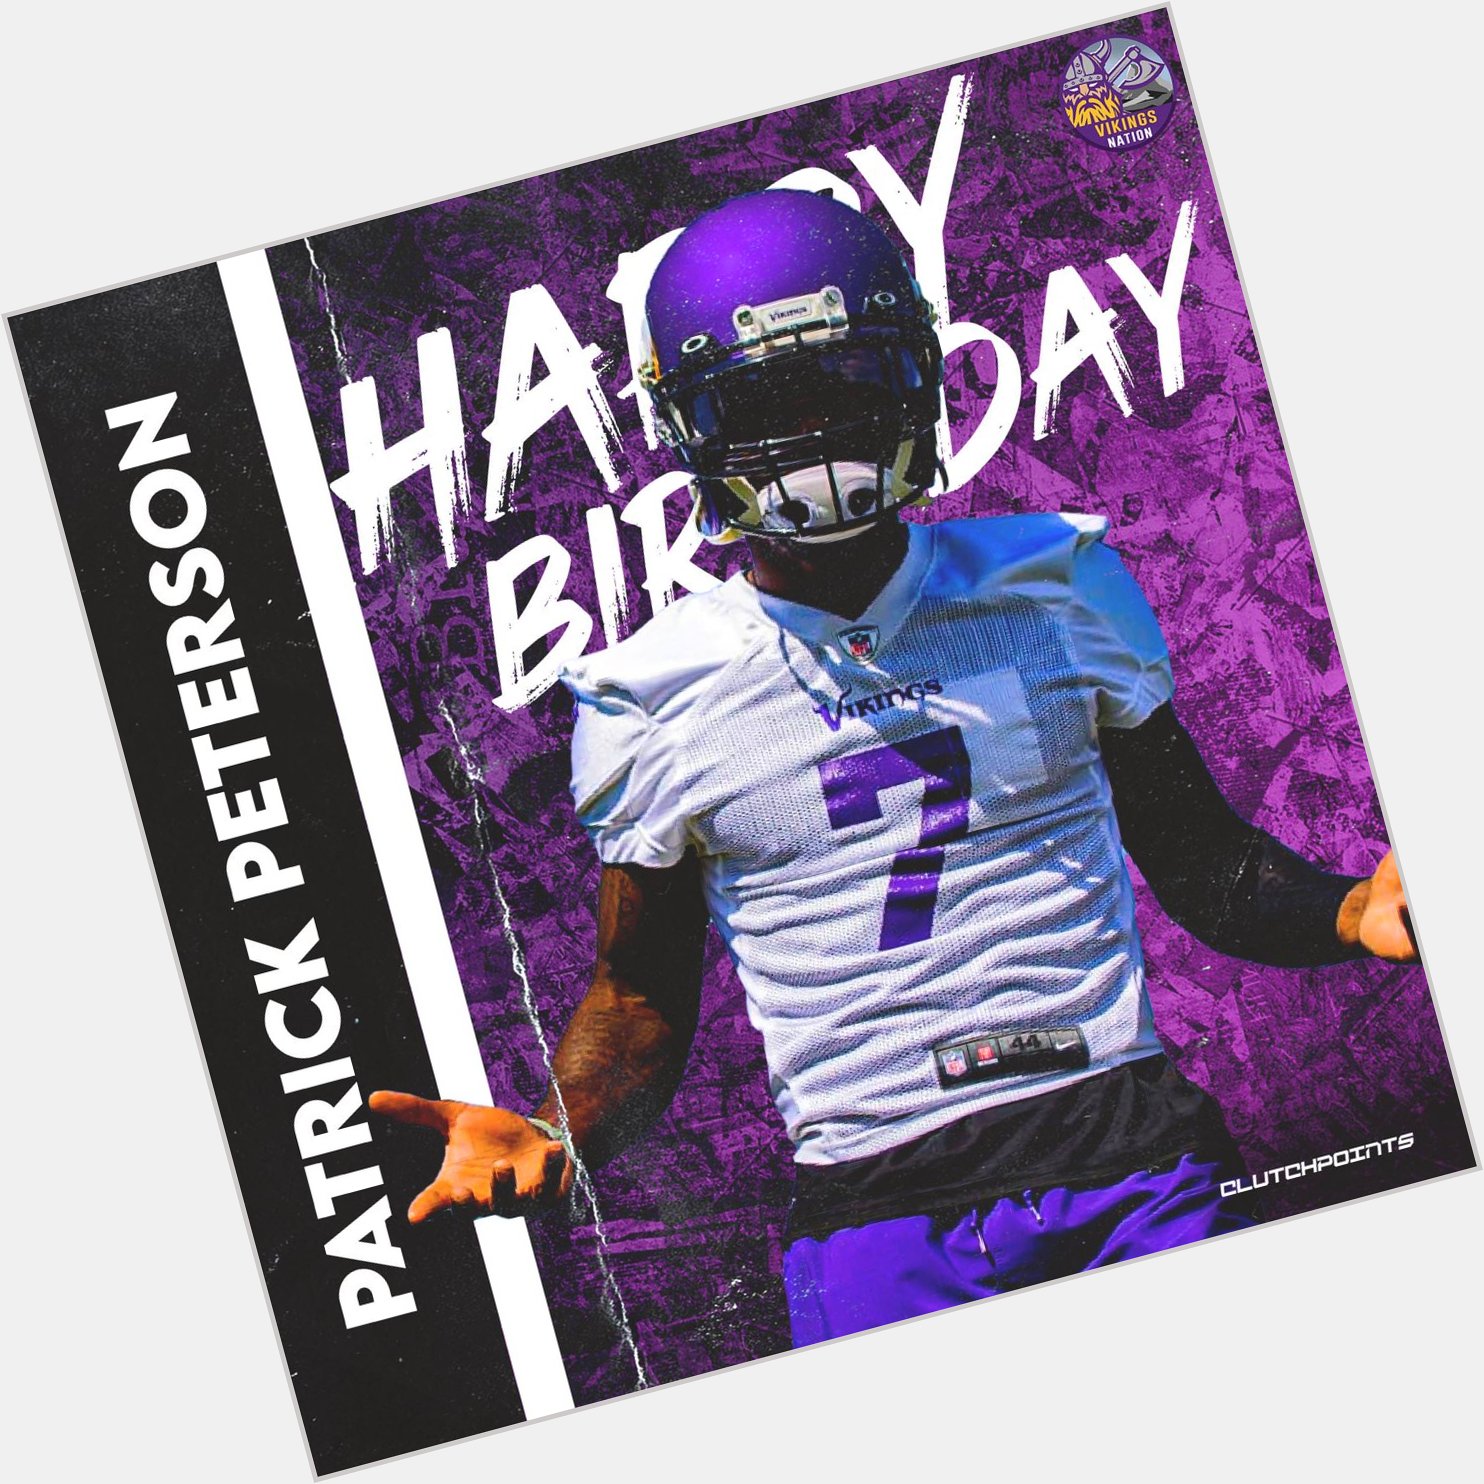 Let us join Vikings Nation in greeting 8x Pro Bowl and 3x All-Pro Patrick Peterson a happy 31st birthday!  